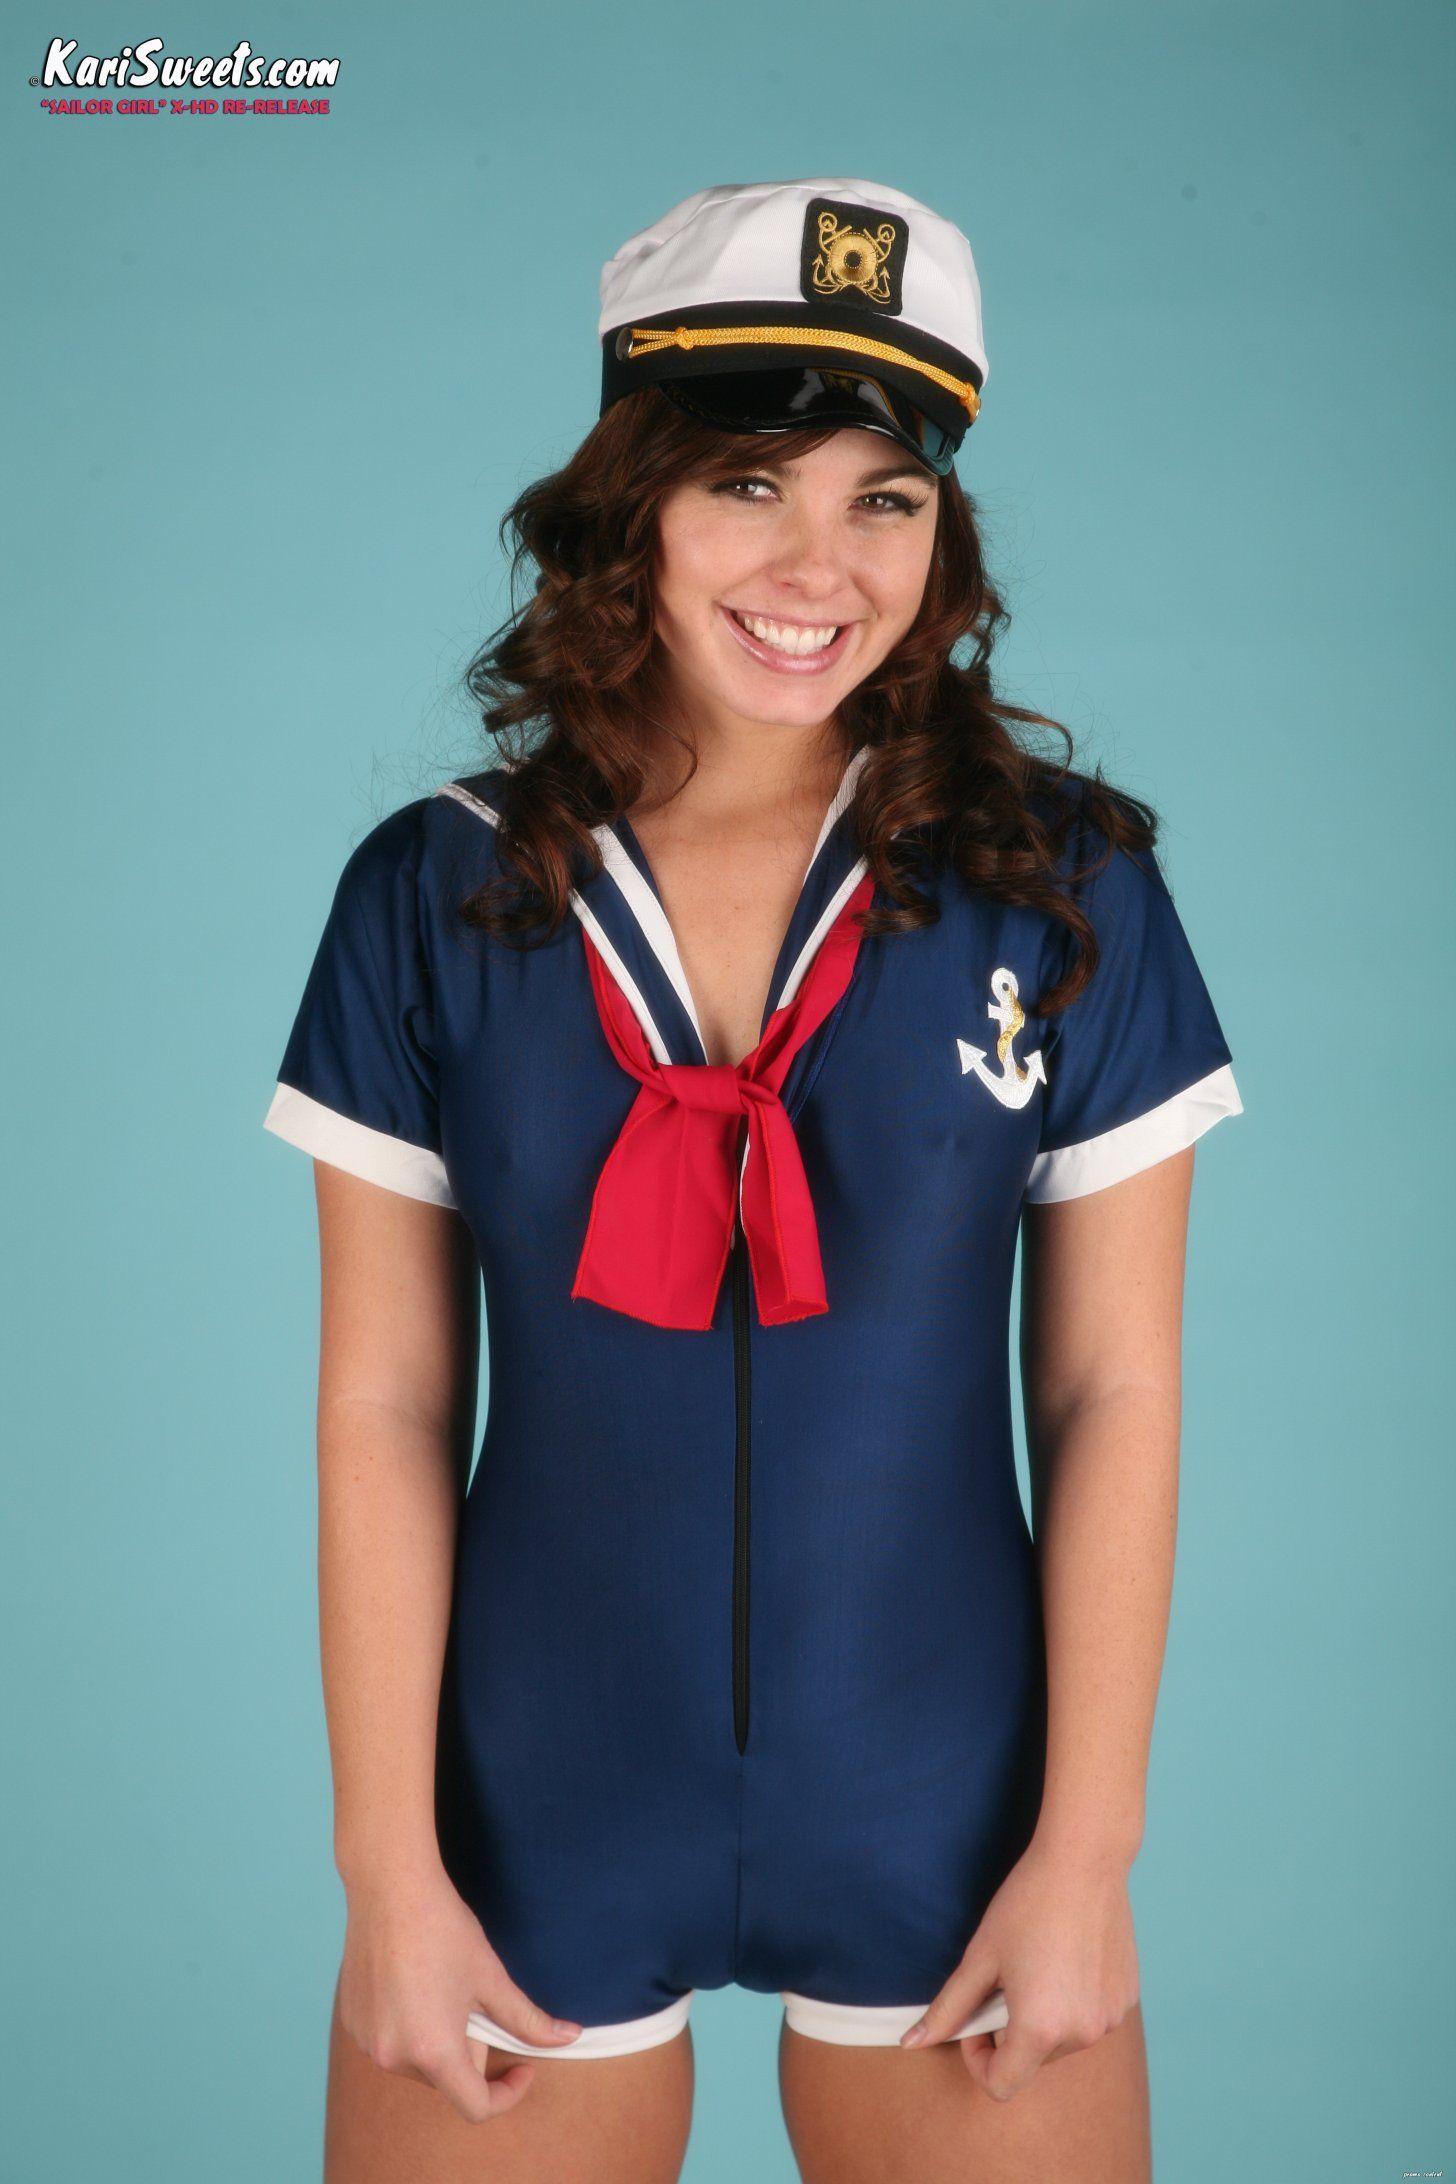 Kari Sweets gives you a hot tease in her sailor outfit #58020499